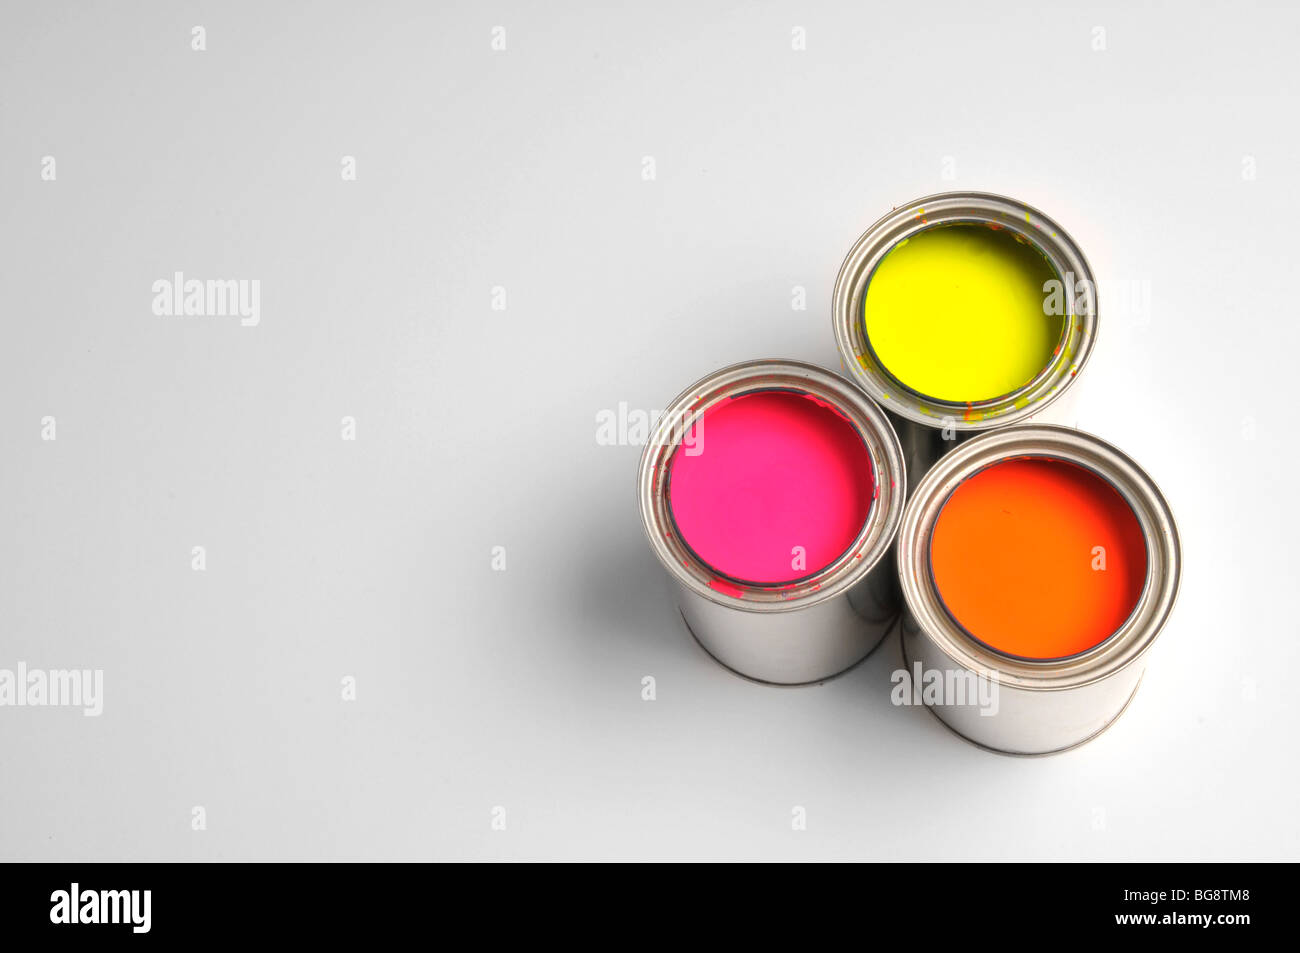 Cans of paint without a lid isolated on a gray background Stock Photo